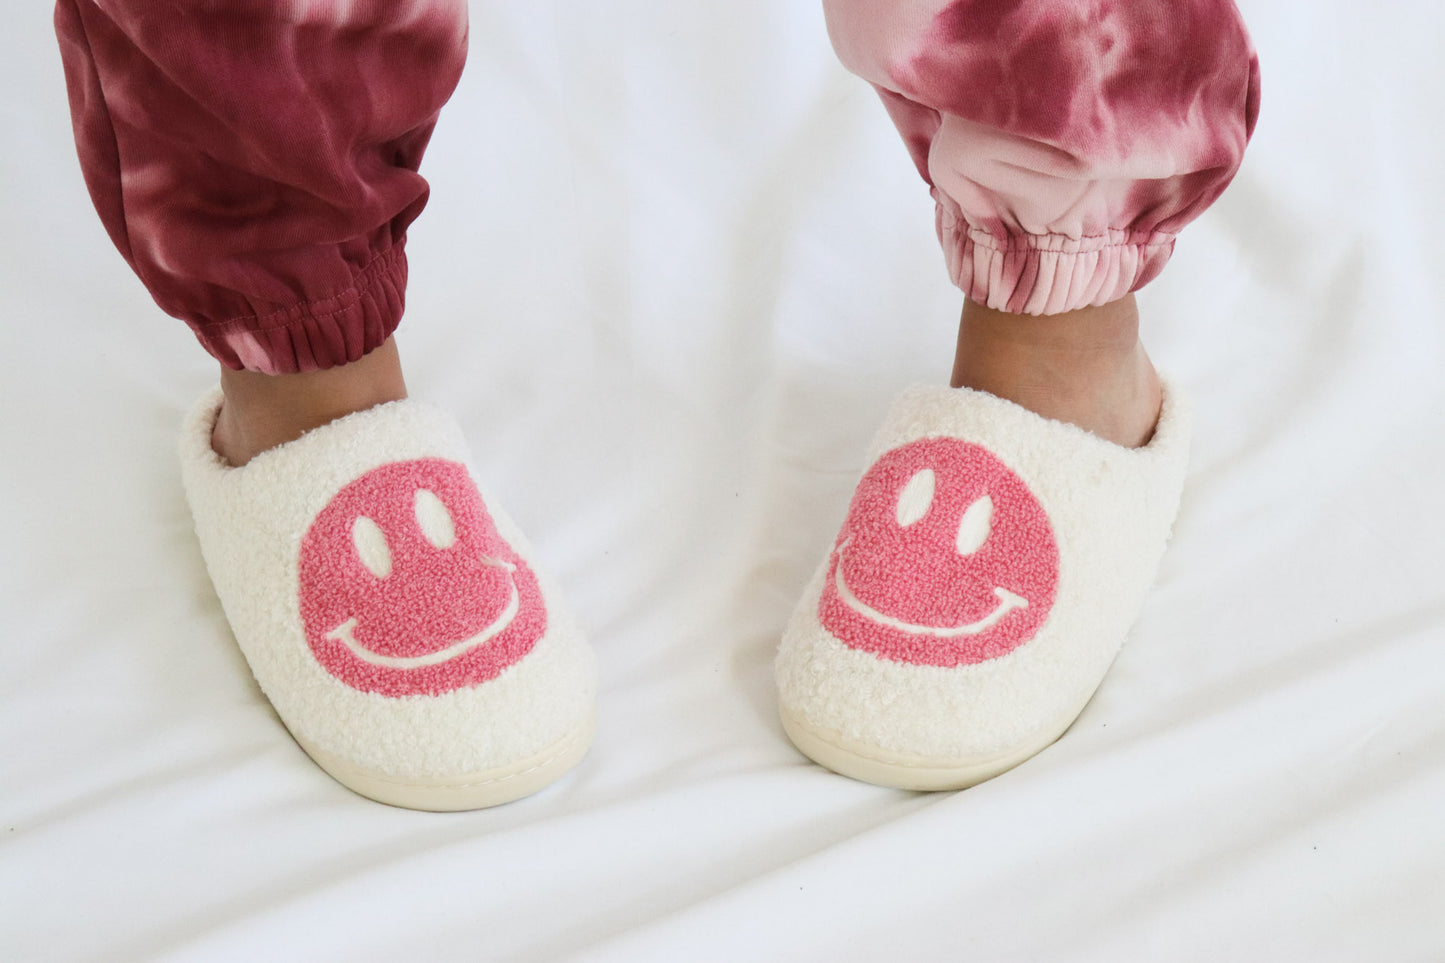 Smiley Face Slippers A Guide to Happiness